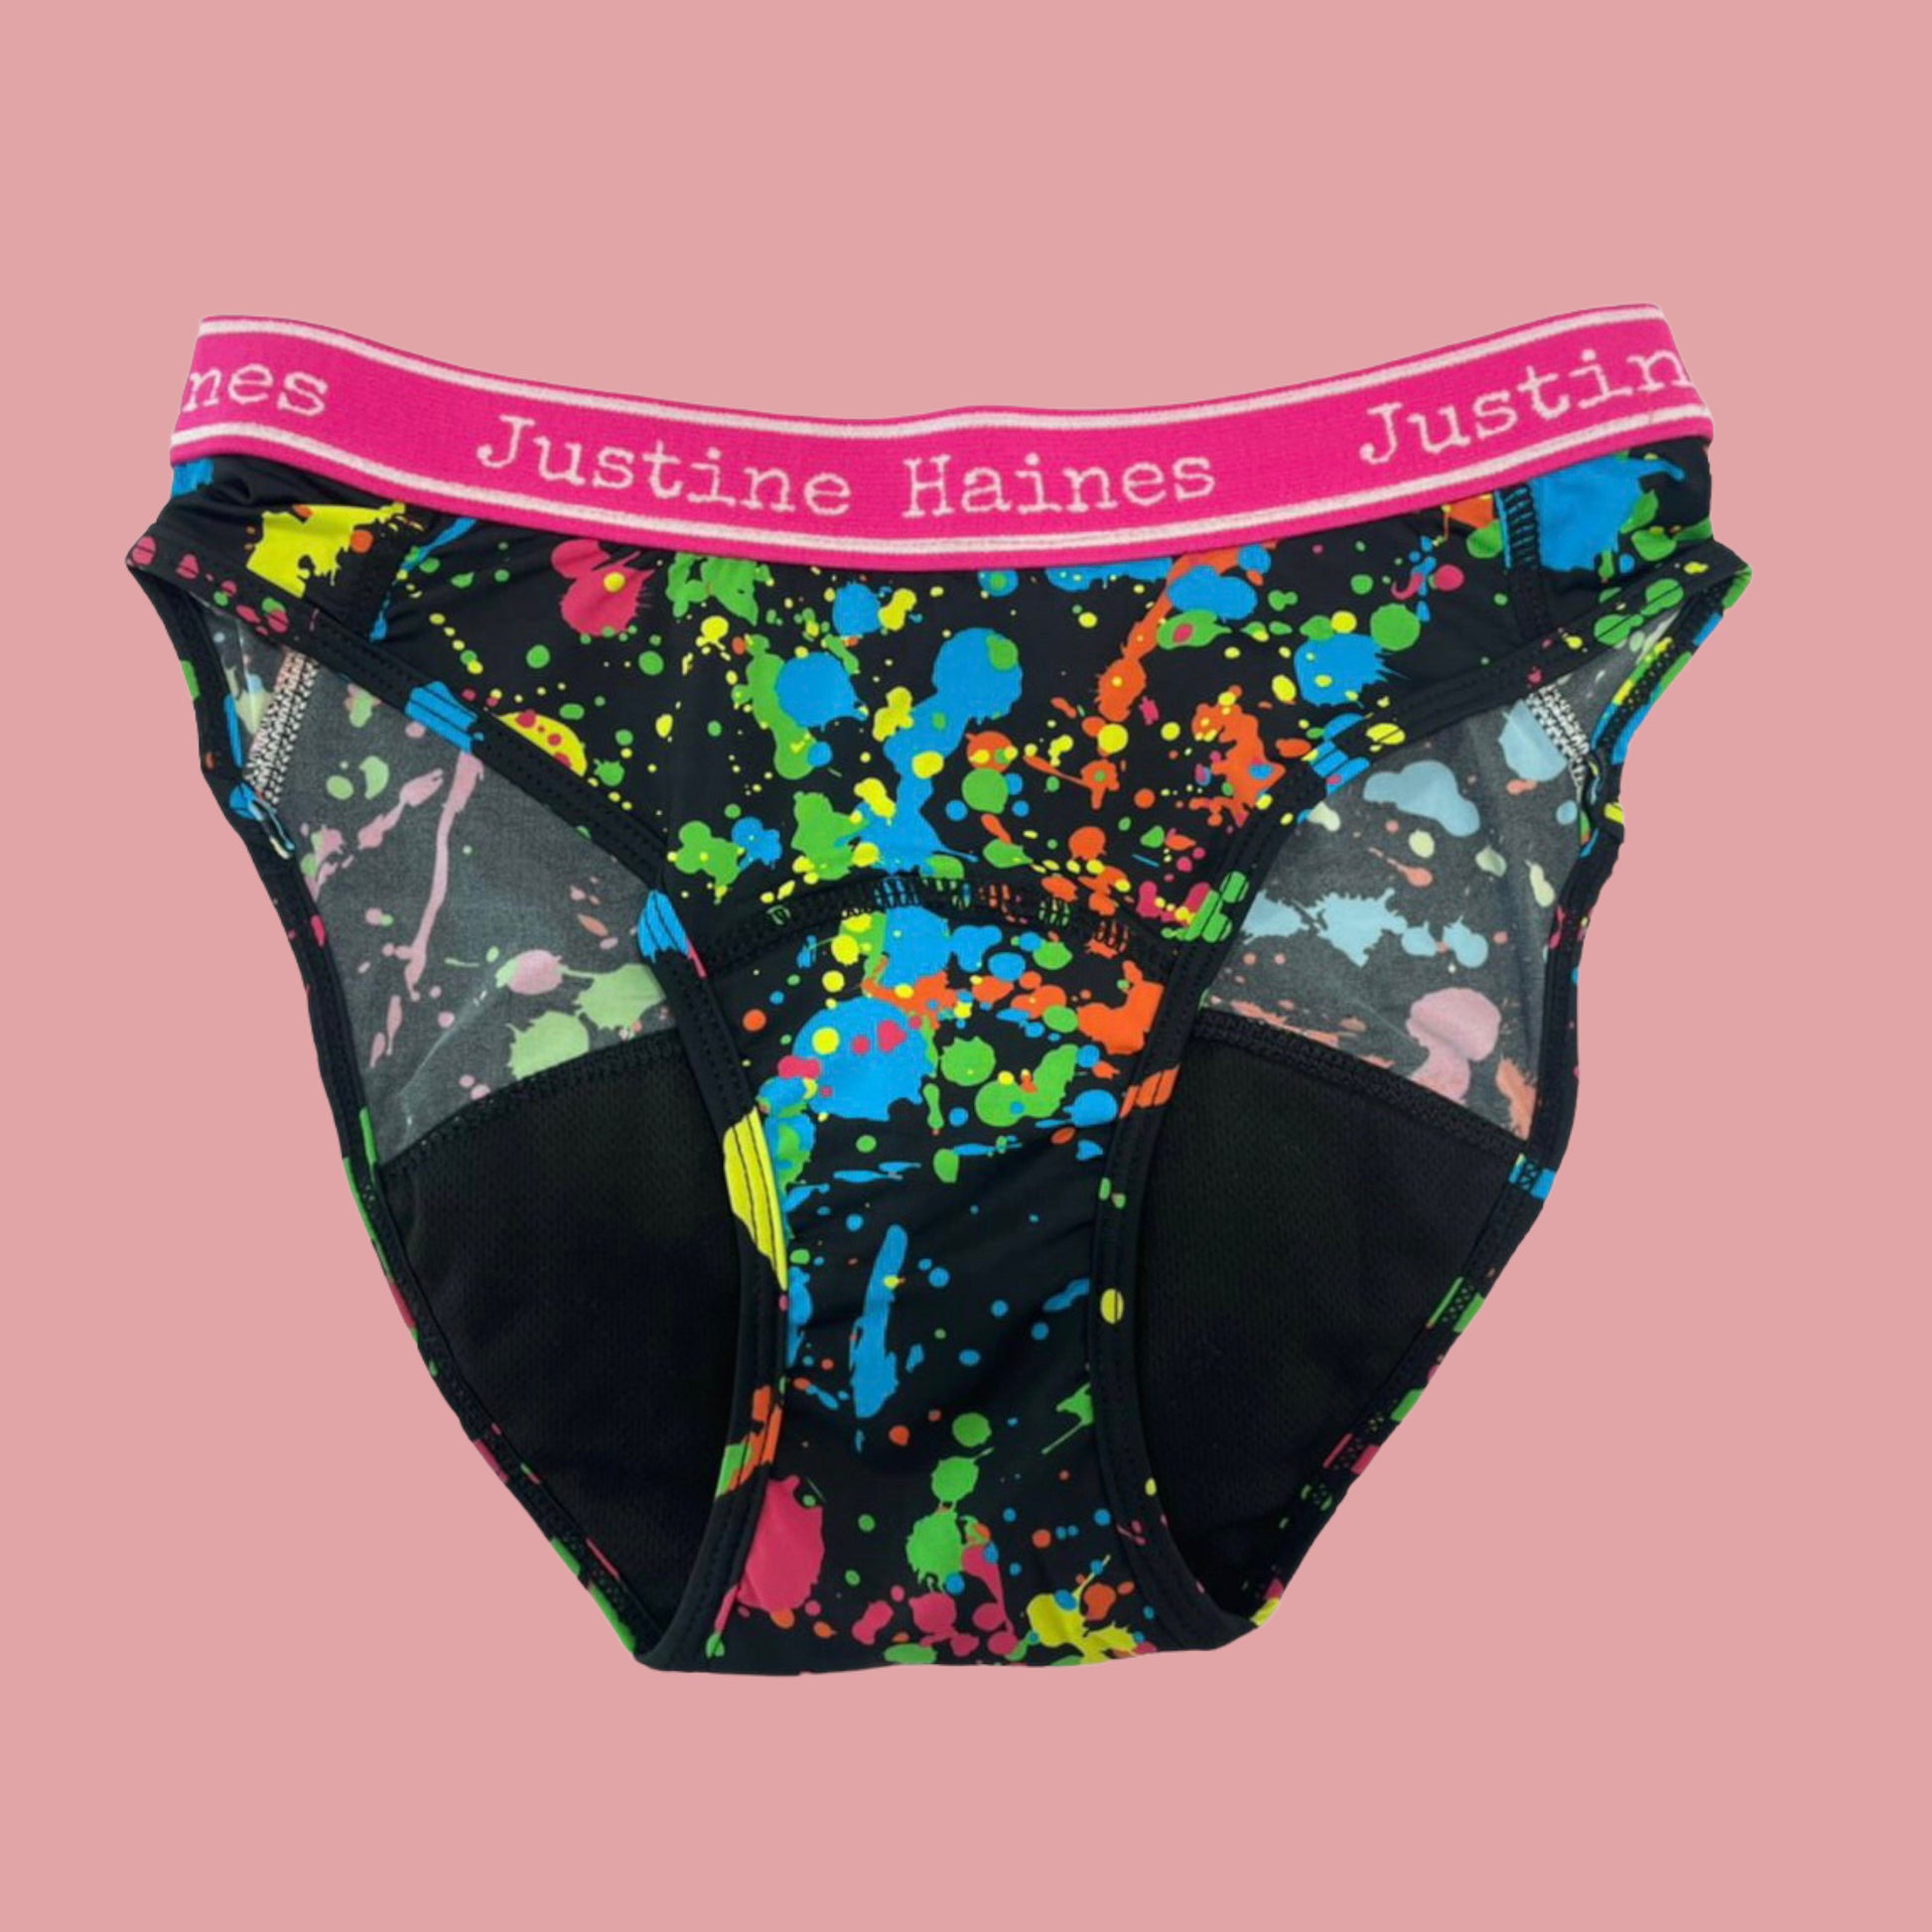 Low-Rise Period Panties in 80s Neon Paint – Justine Haines